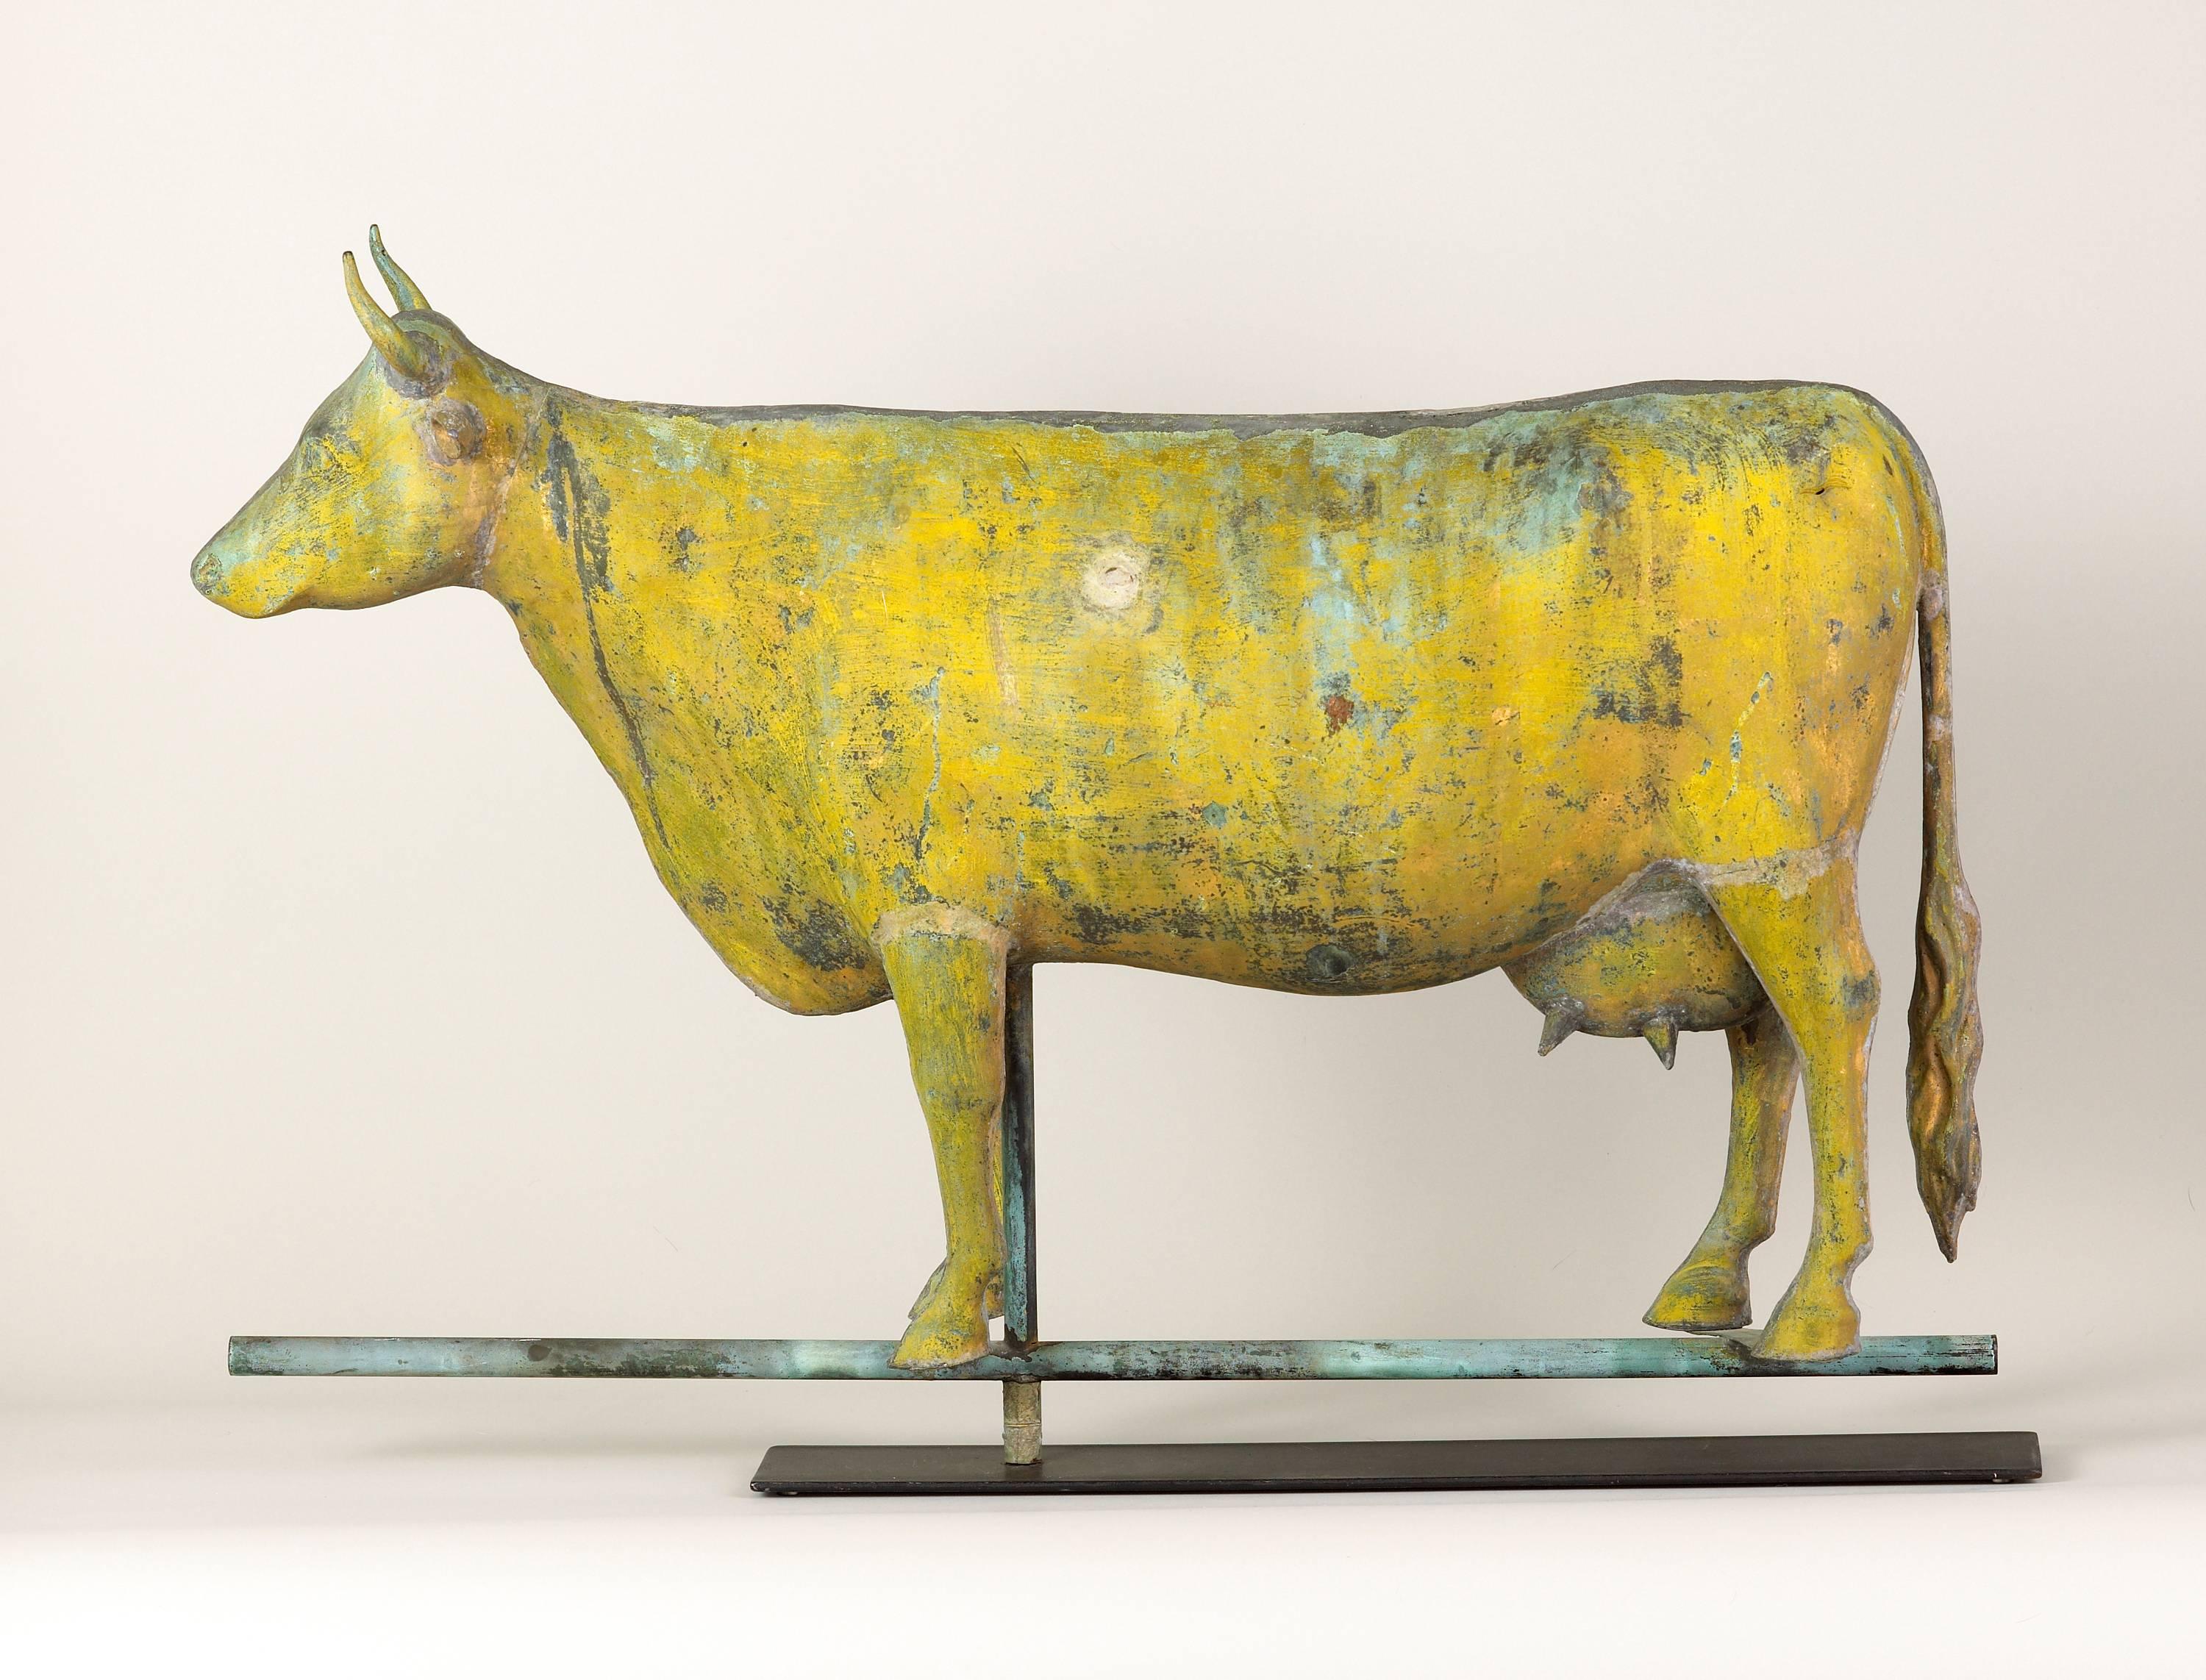 An exceptional Folk Art full-bodied cow weathervane of molded copper and cast zinc. This cow weathervane retains a beautiful weathered surface of yellow sizing, traces of gilt and verdigris. Possibly by Harris and Co. of Boston, Massachusetts.